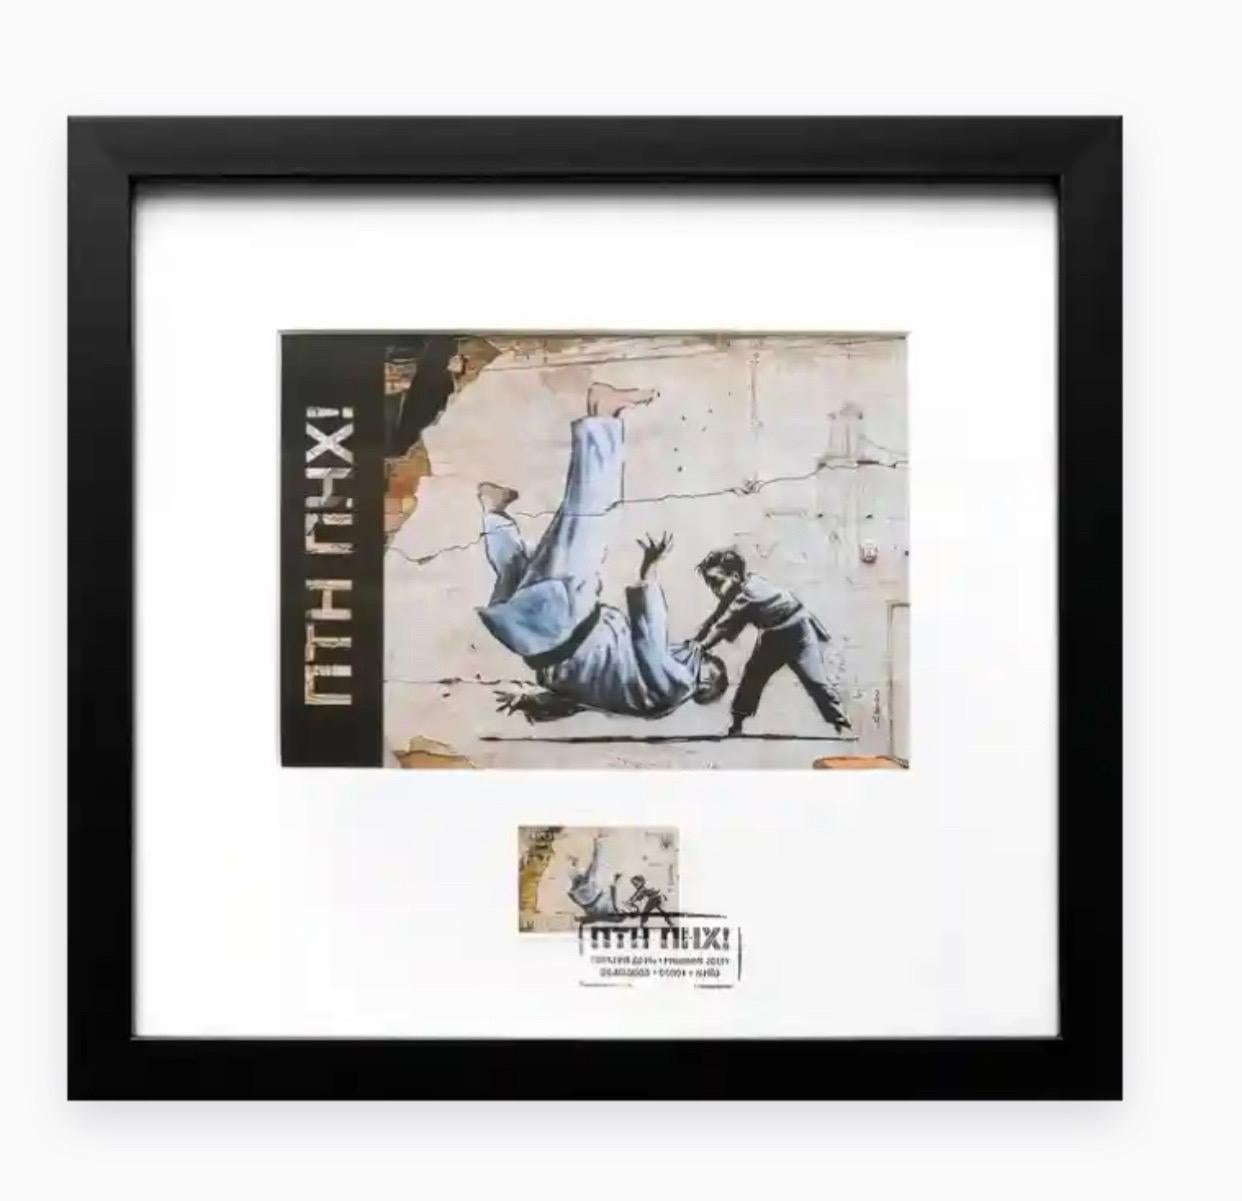 Banksy, ПТН ПНХ! (FCK PTN!)- Ukraine Stamp and Postcard, 2023

offset lithographic postcard with stamp and inkstamp
from the unnumbered edition of 1,000
issued by The National Post Office of Ukraine
overall 23 x 22.4cm
framed